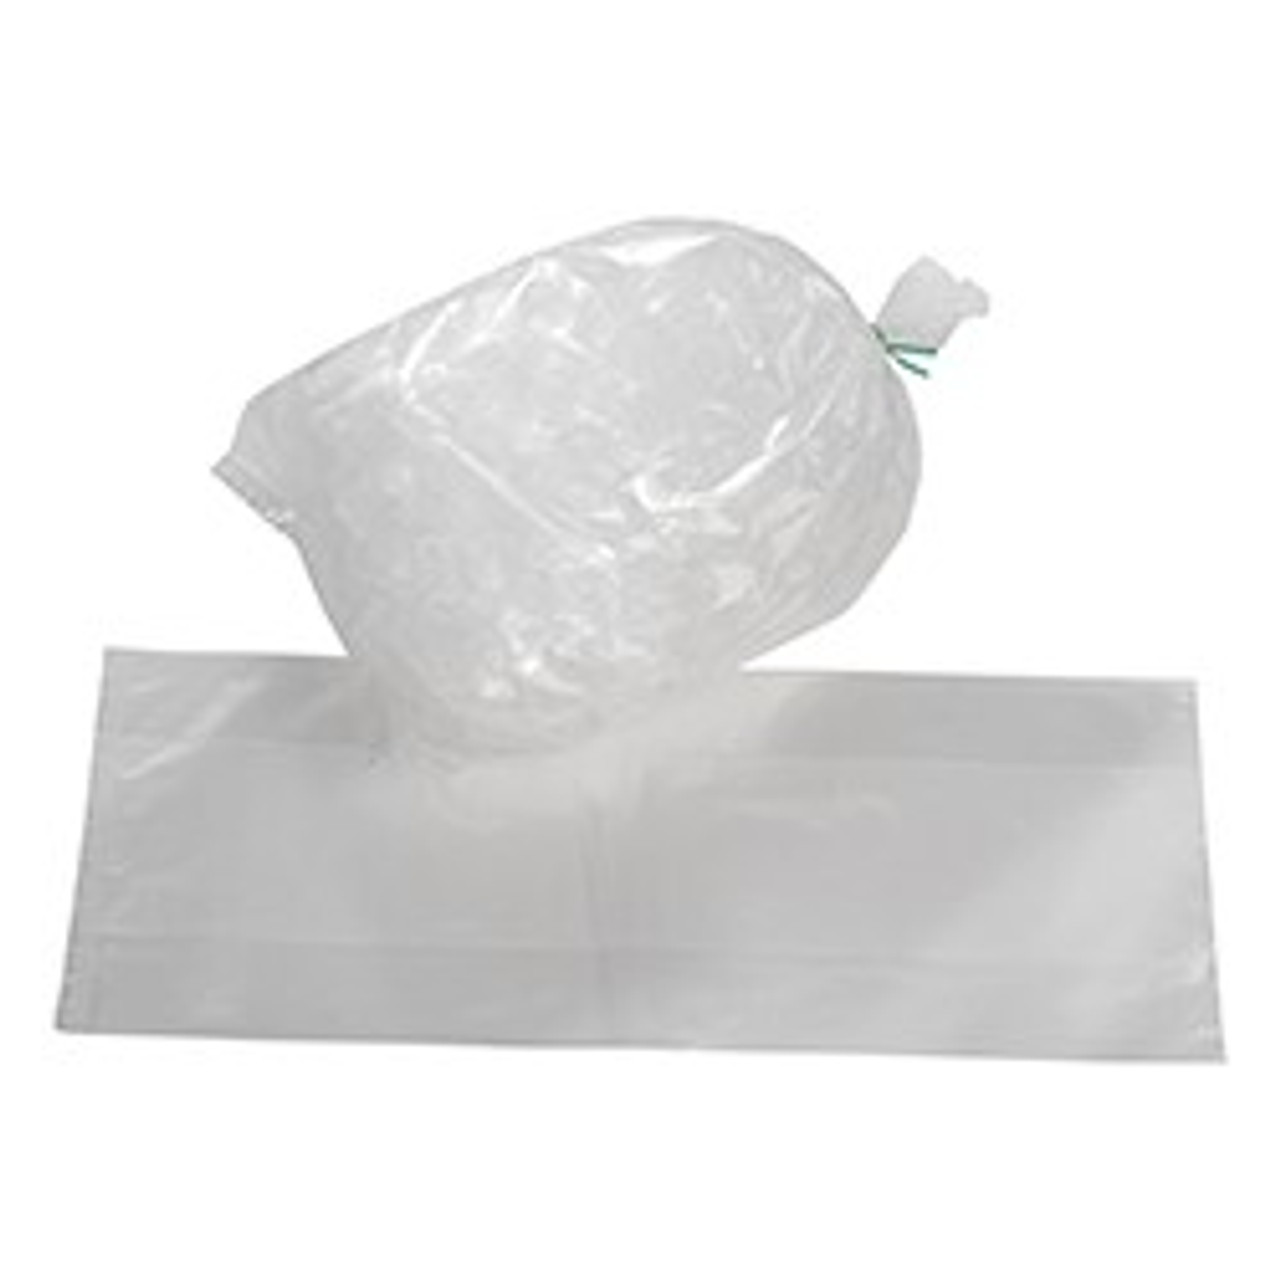 Miscellaneous Vendor 130IC10PL 1M Plastic 10 lb Ice Bag with Ice Print  15 mil 12 X 21 in Clear 1000case  Baumann Paper